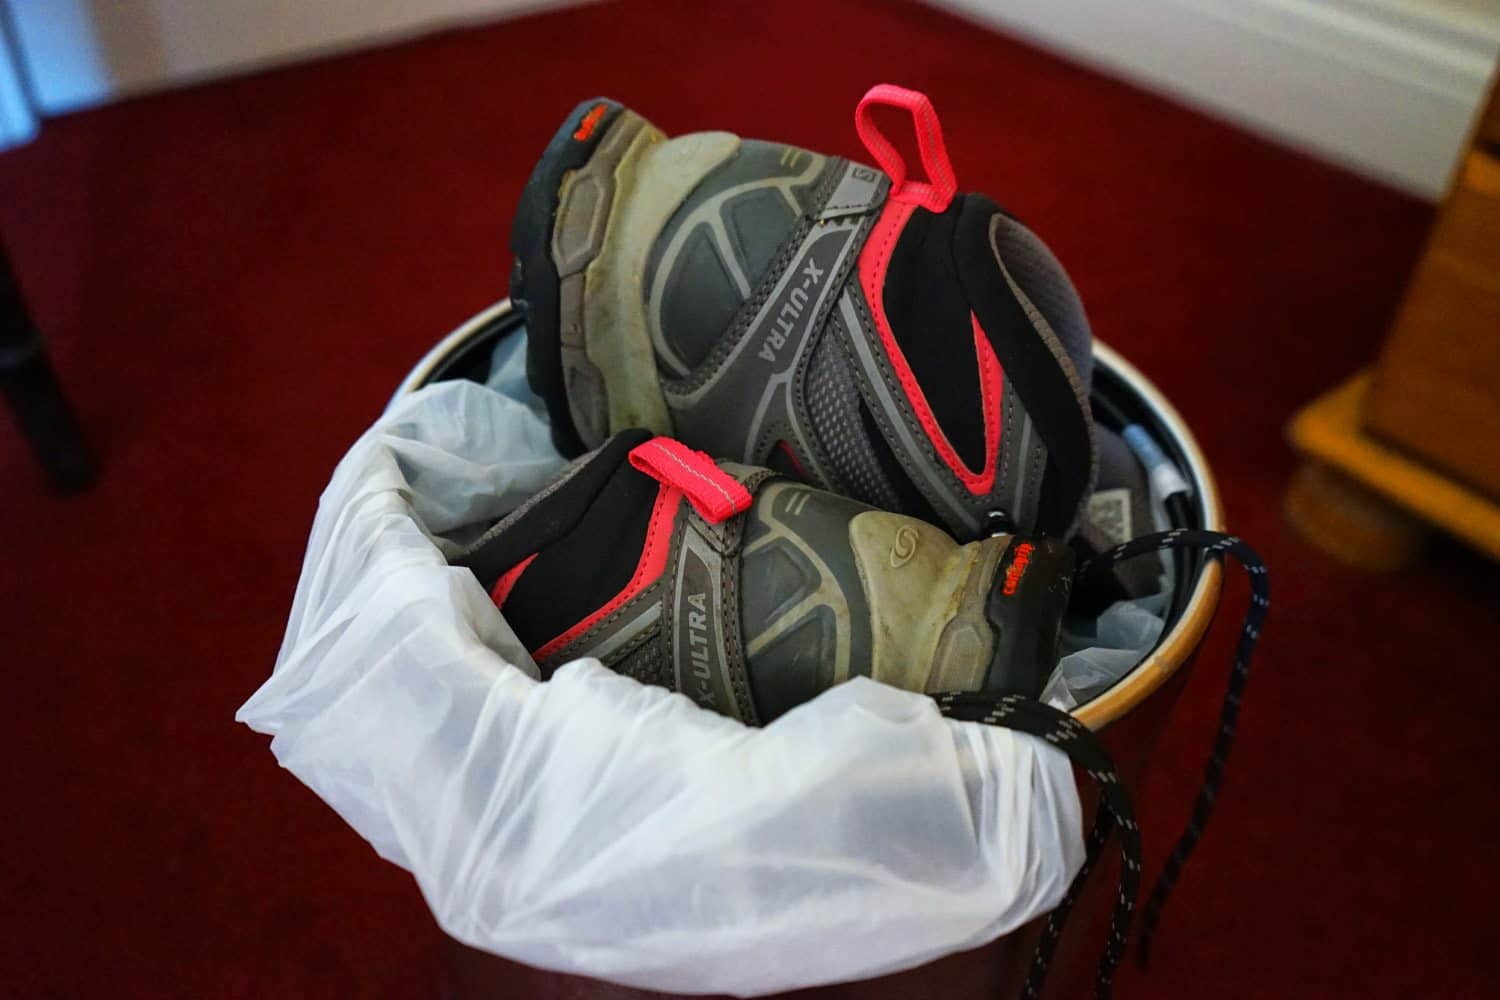 Hiking shoes in the trash